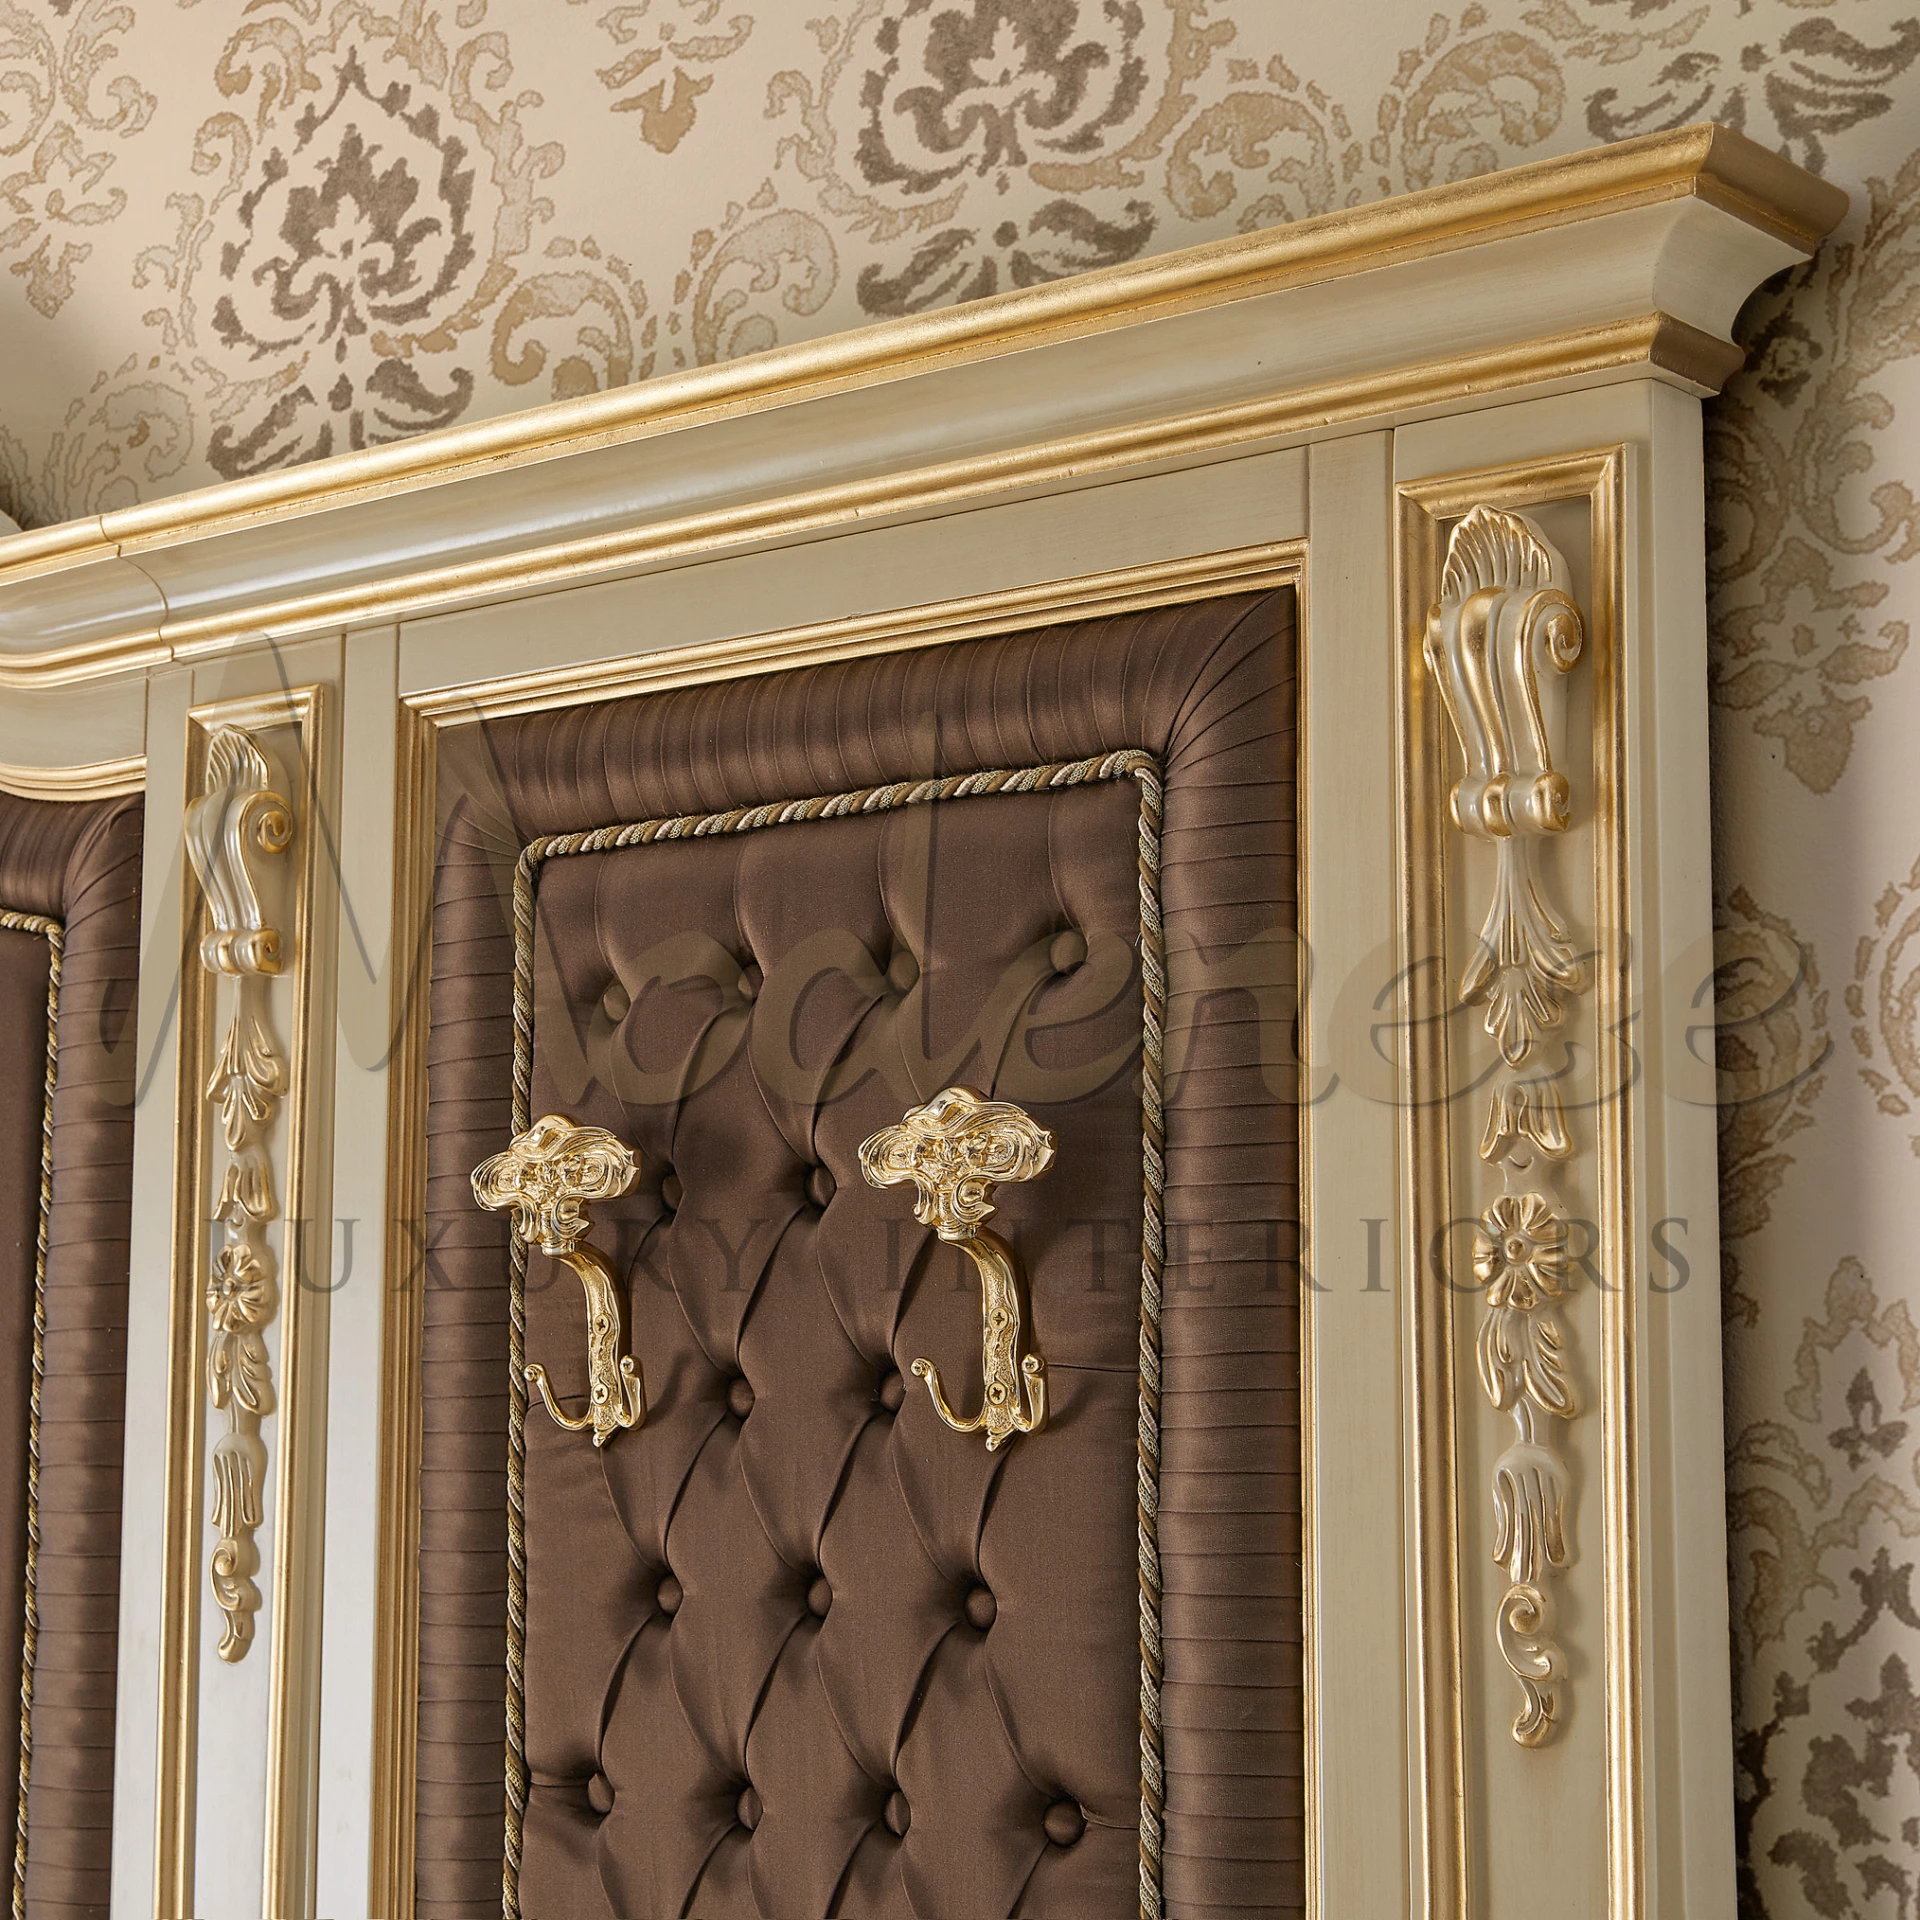 Elegant Entrance Panel showcasing exquisite upholstery work, ideal for adding a touch of luxury to your home's entrance.